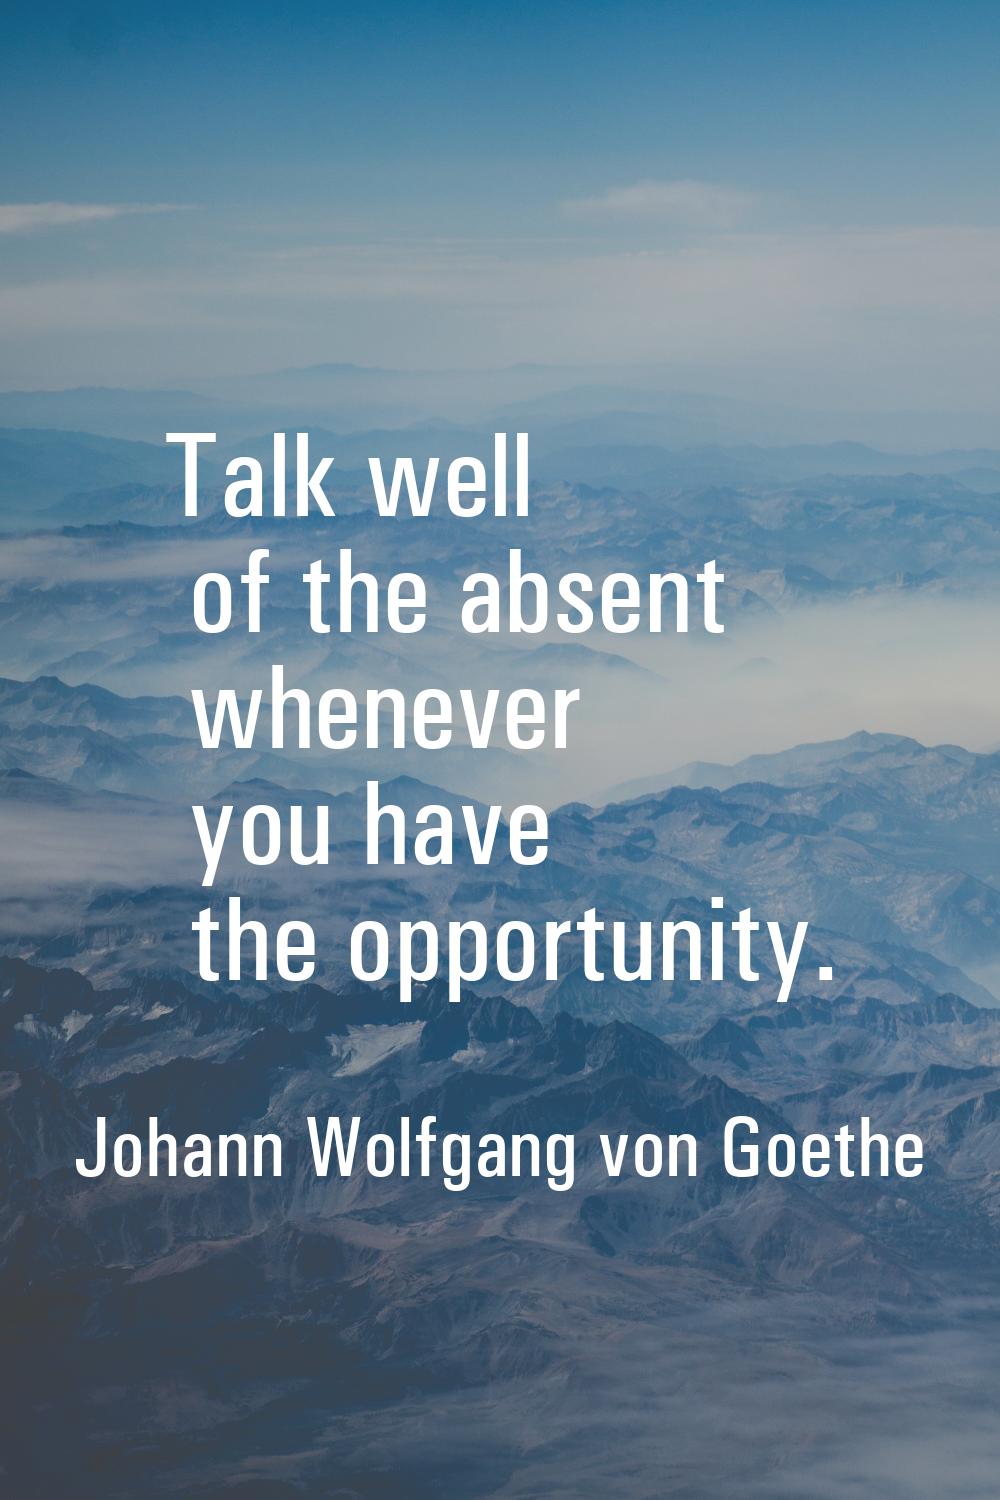 Talk well of the absent whenever you have the opportunity.